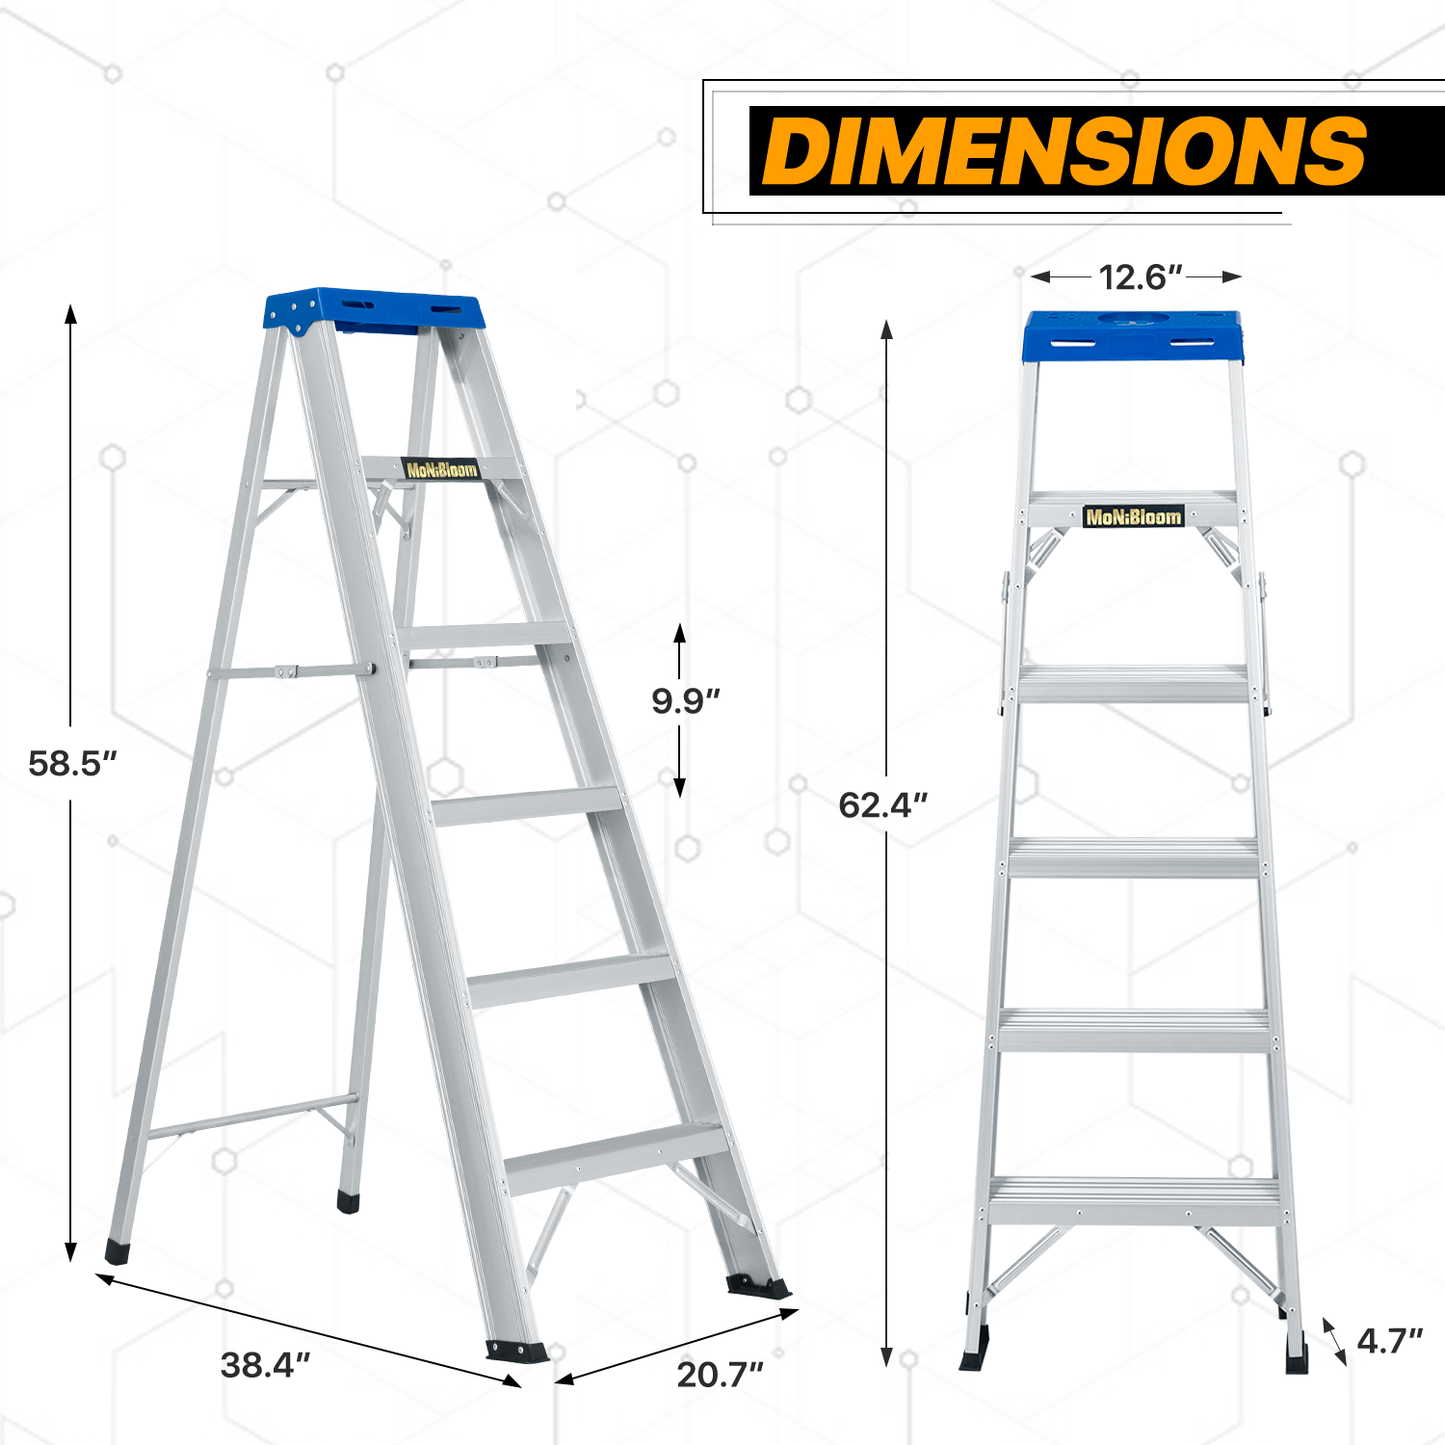 A-Frame Folding Ladder w/Tool Tray - 5 Steps 4.88 ft/58.5", Blue/Silver